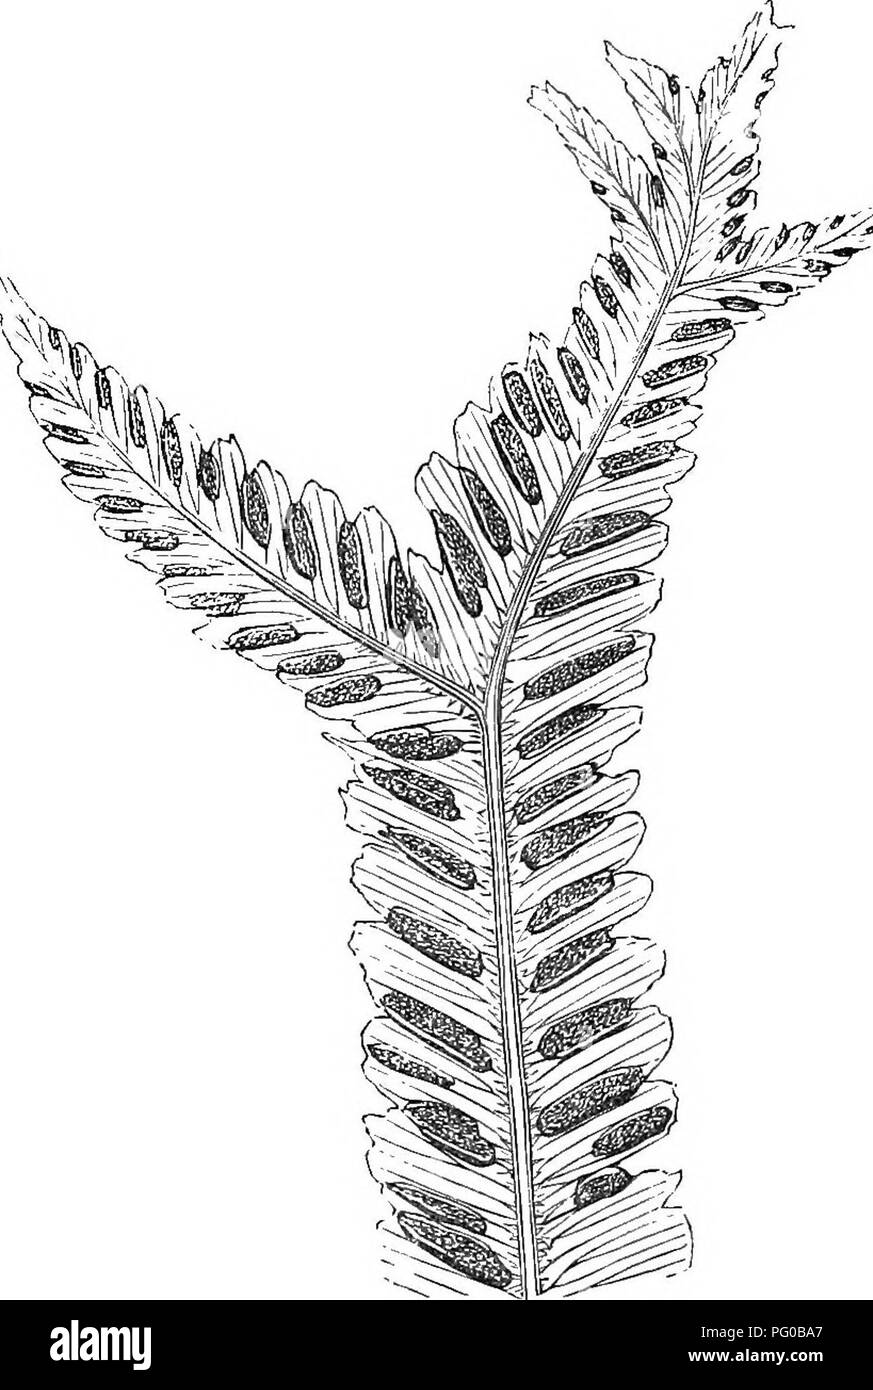 . A natural history of new and rare ferns : containing species and varieties, none of which are included in any of the eight volumes of &quot;Ferns, British and exotic&quot;, amongst which are the new hymenophyllums and Trichomanes . Ferns. '.y::^. Apex of Frond. SCOLOPENDRIUM VULGARE, Var. Crenato-multifidum. Scolopendrium—Hart's-tongue. I'ulgare—Common. Crenato-multifidum—CxejisXe multifid. A HANDSOME form of tlie Hart's-tongue Fern, gathered by- several persons in various limestone districts. Crenate on the margins, with a marginal line on the under surface, and multifidly furcate at the ap Stock Photo